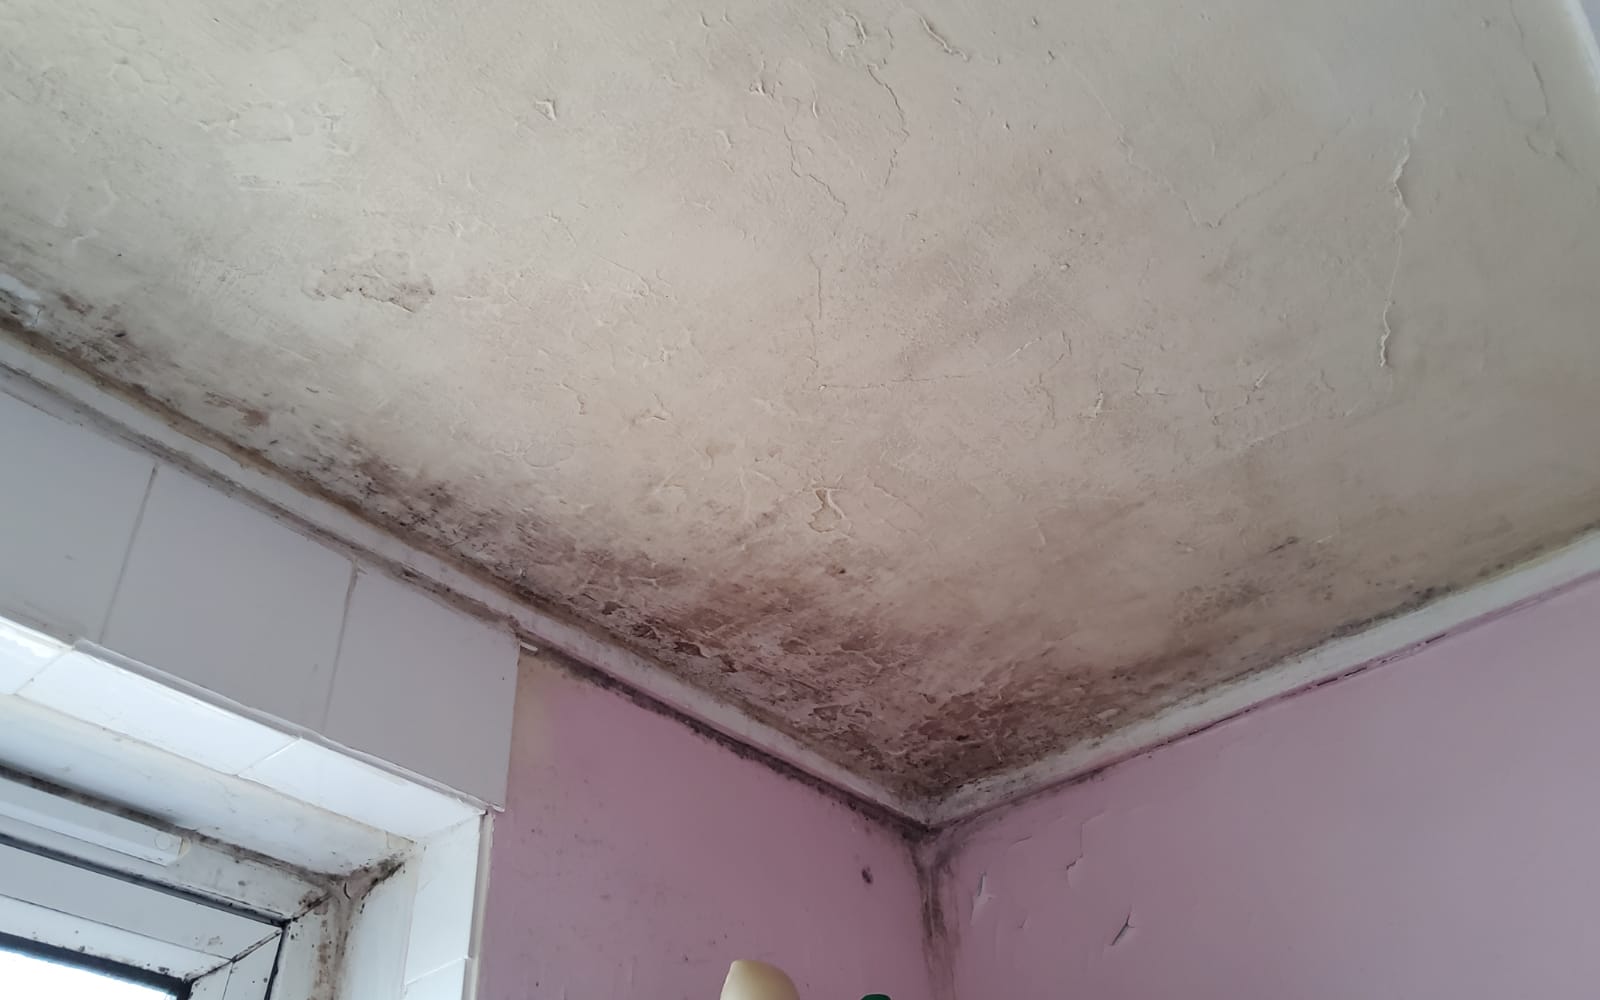 A ceiling with black mould